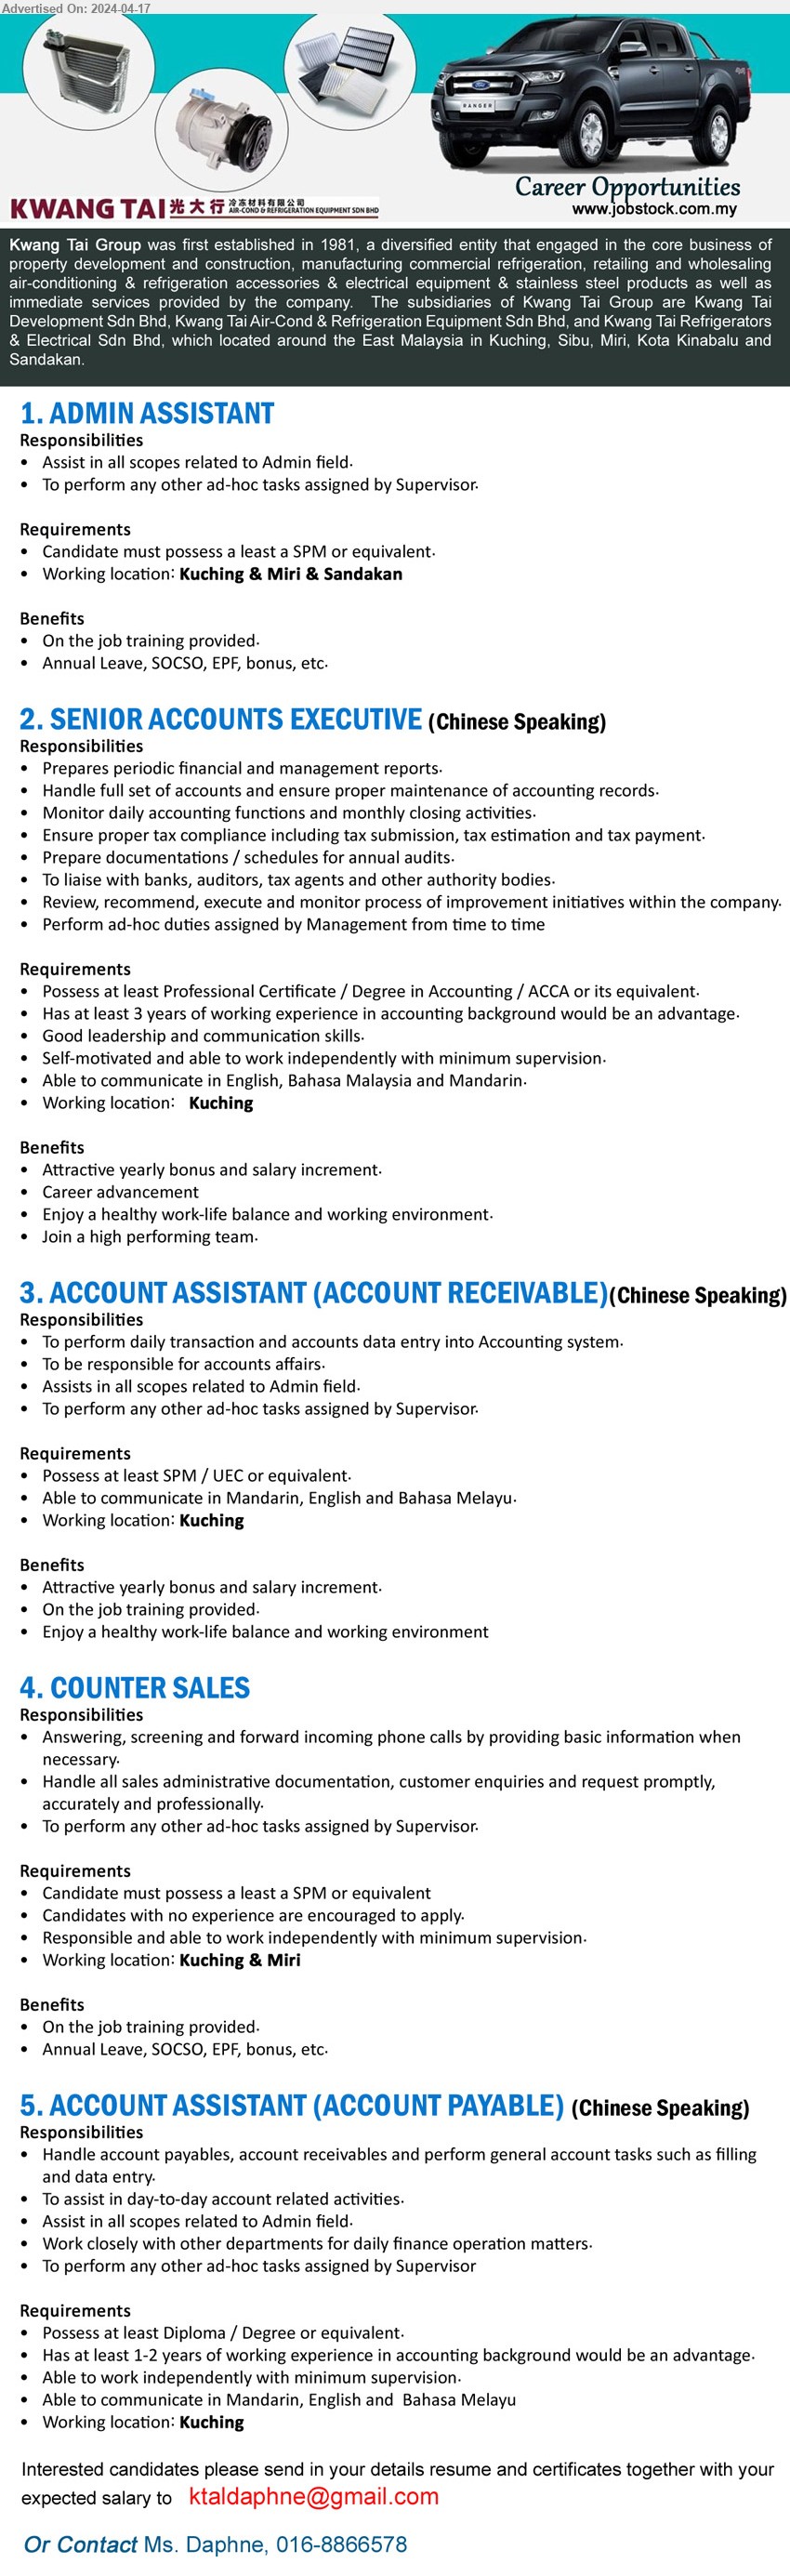 KWANG TAI GROUP - 1. ADMIN ASSISTANT (Kuching & Miri & Sandakan), SPM, Assist in all scopes related to Admin field.,...
2. SENIOR ACCOUNTS EXECUTIVE (Kuching), Possess at least Professional Certificate / Degree in Accounting / ACCA,...
3. ACCOUNT ASSISTANT (ACCOUNT RECEIVABLE) (Kuching), SPM / UEC, Able to communicate in Mandarin, English and Bahasa Melayu.,...
4. COUNTER SALES (Kuching, Miri), SPM, Candidates with no experience are encouraged to apply.,...
5. ACCOUNT ASSISTANT (ACCOUNT PAYABLE) (Kuching), Diploma / Degree, Has at least 1-2 years of working experience in accounting background,...
Contact Ms. Daphne, 016-8866578 / Email resume to ...